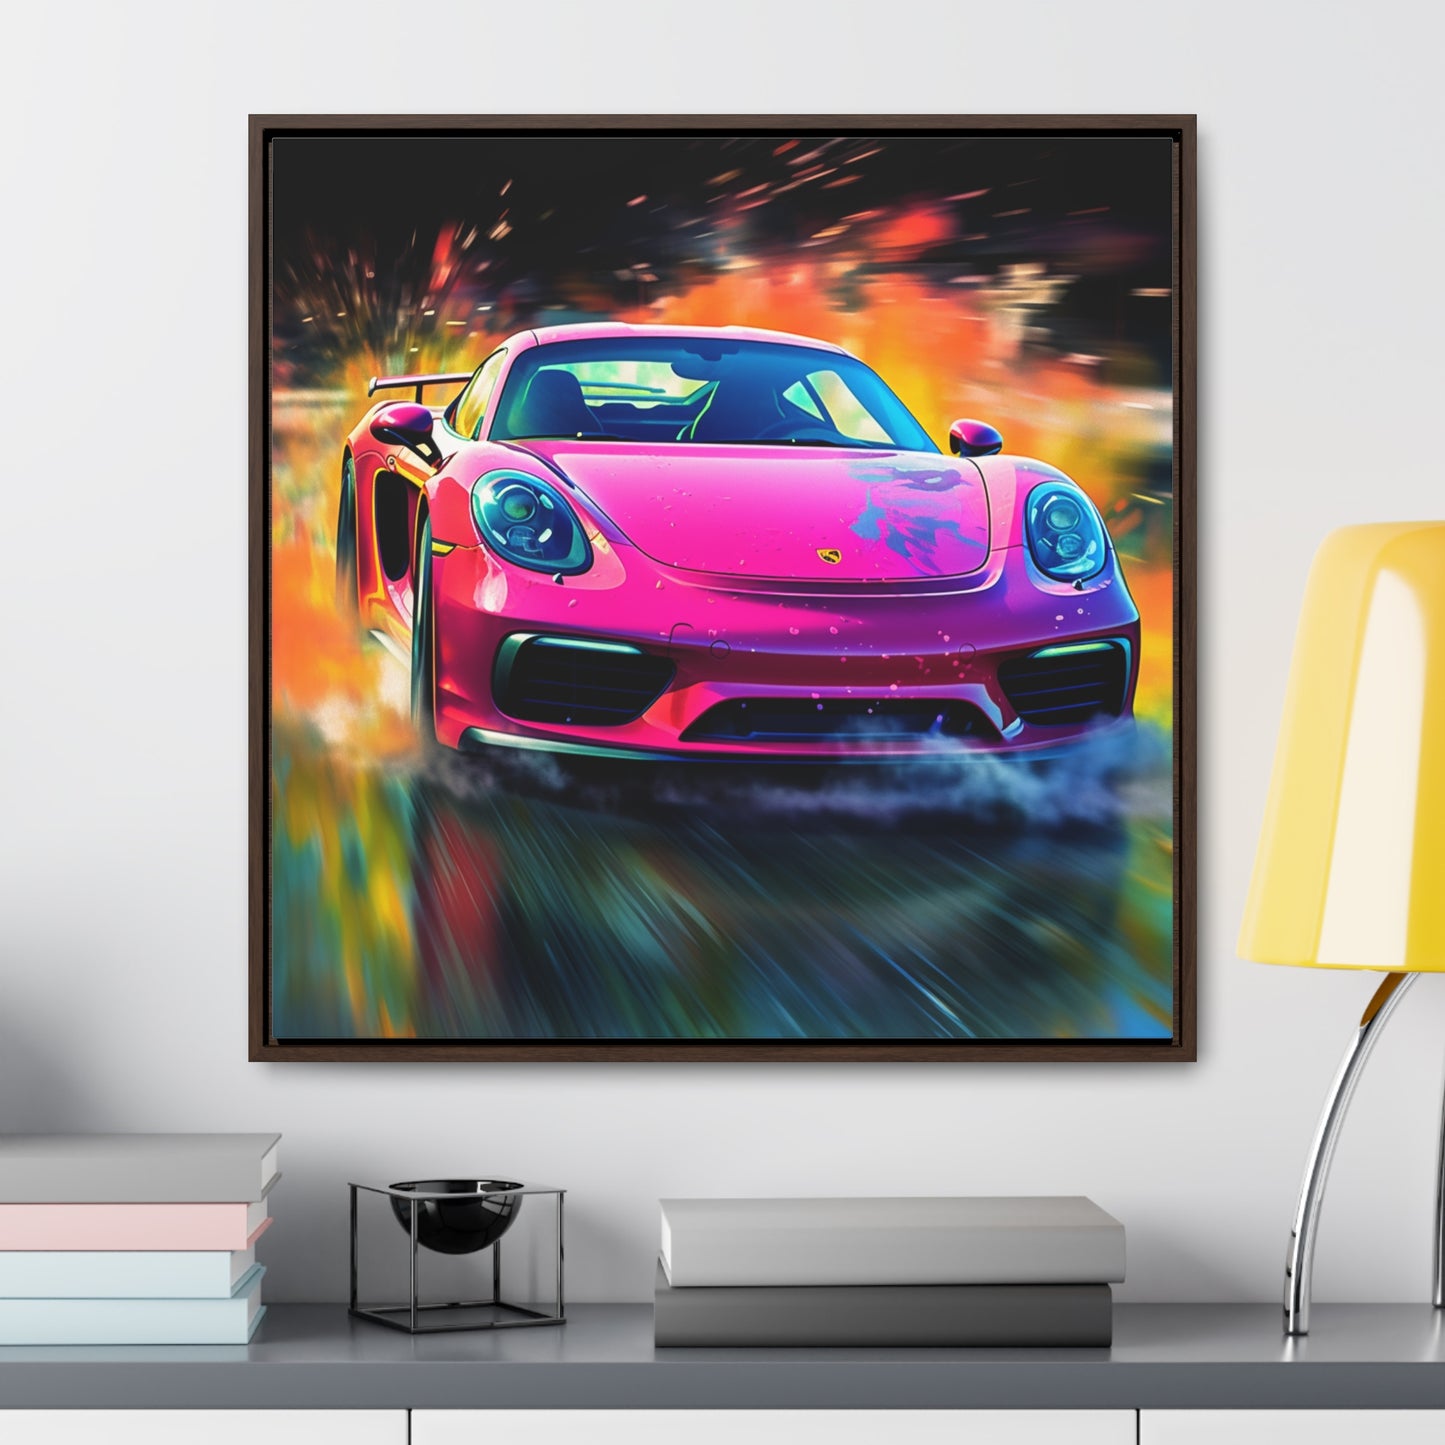 Gallery Canvas Wraps, Square Frame Pink Porsche water fusion 4